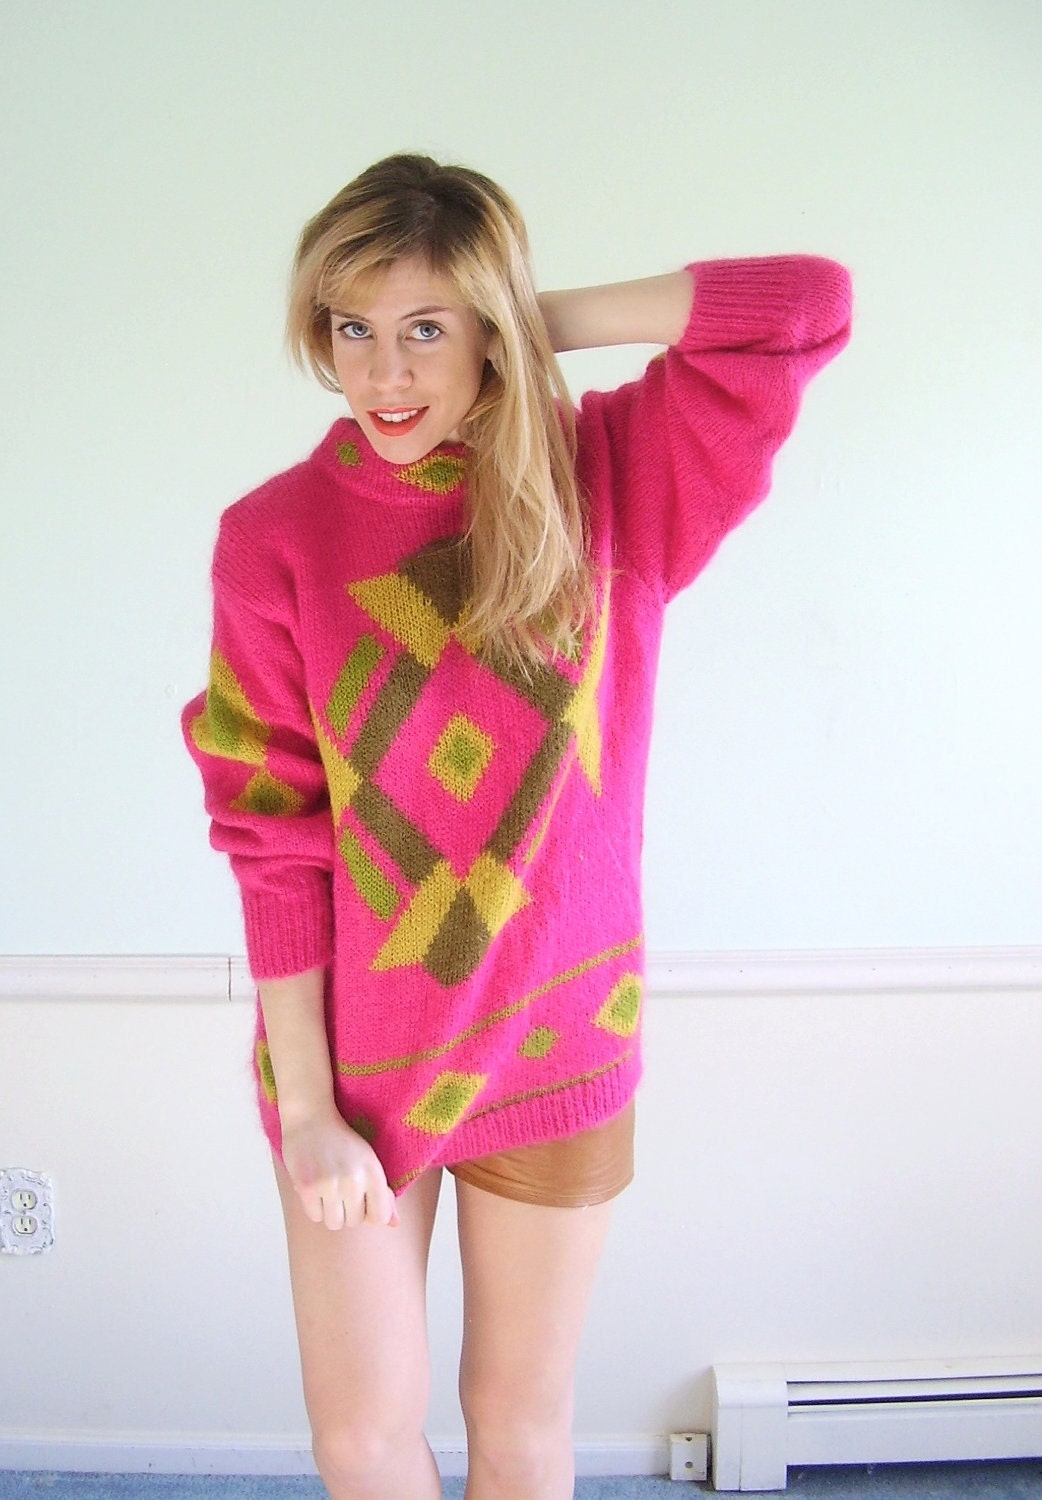 Neon GEO Vintage 80s Bright Pink TRIBAL Patterned Sweater Tunic S/M